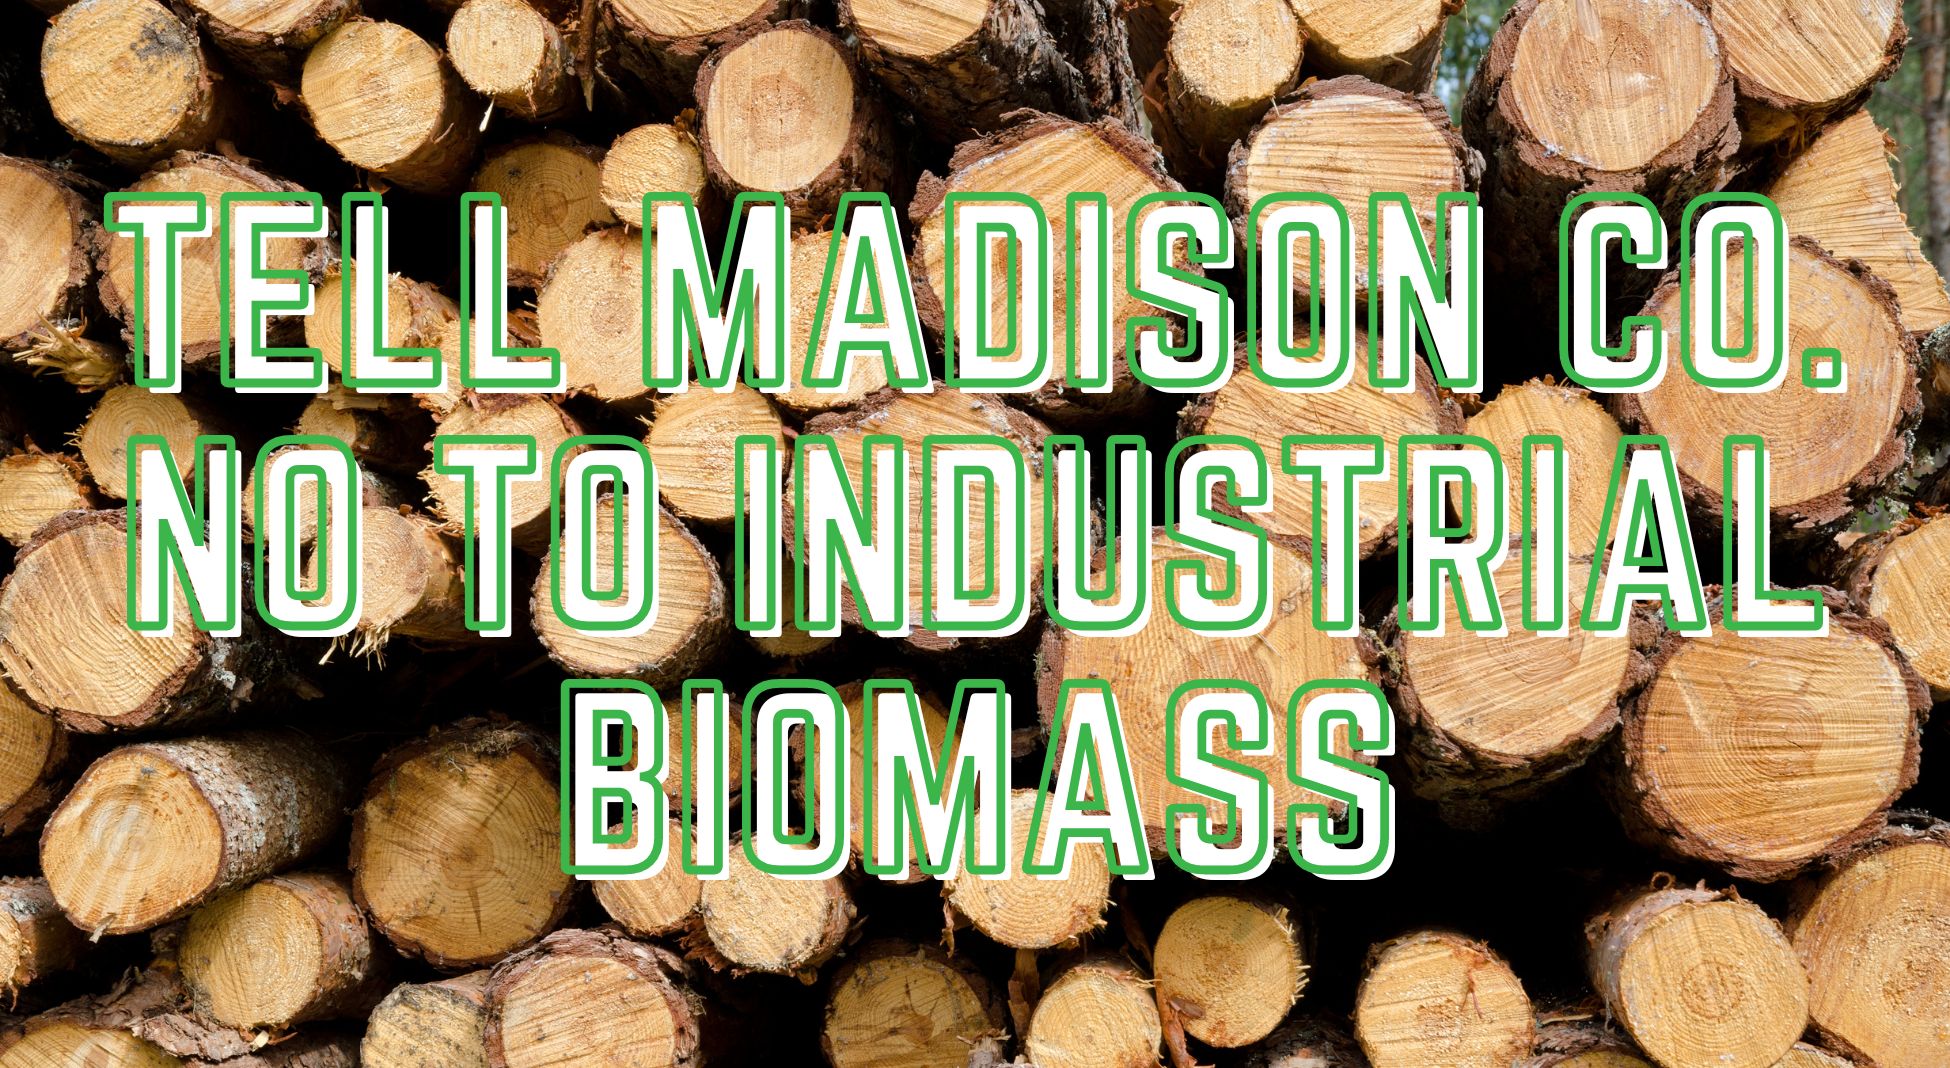 Tell Madison County to Oppose Dangerous Industrial Biomass Facilities